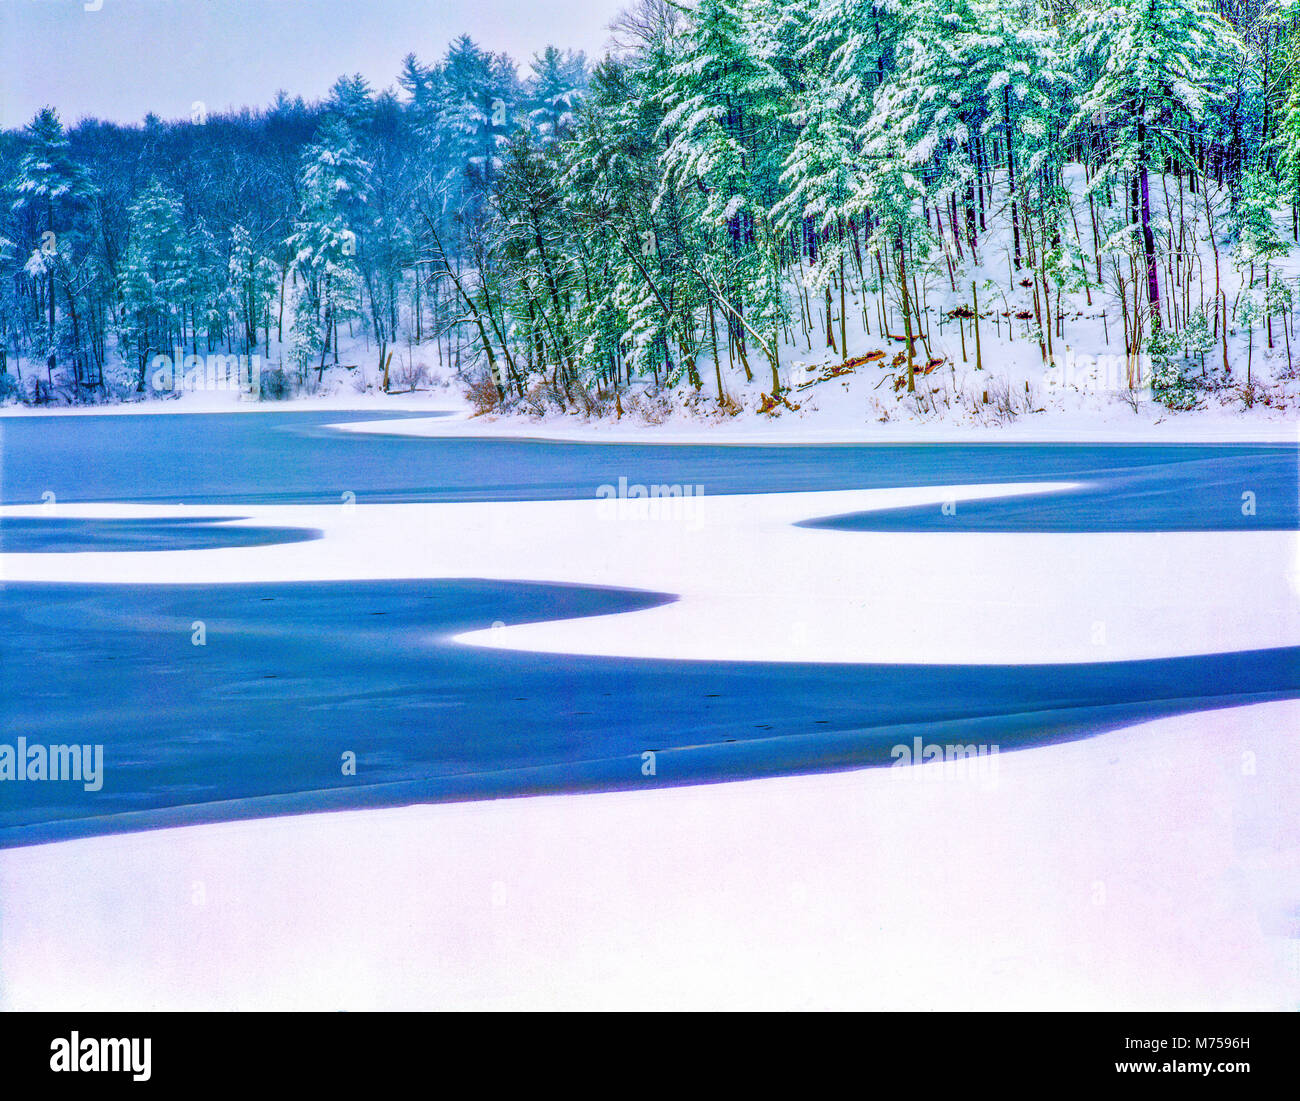 Walden pond in winter, Walden Pond State Reservation, Massachusetts, Famous home of Henry David Thoreau Stock Photo